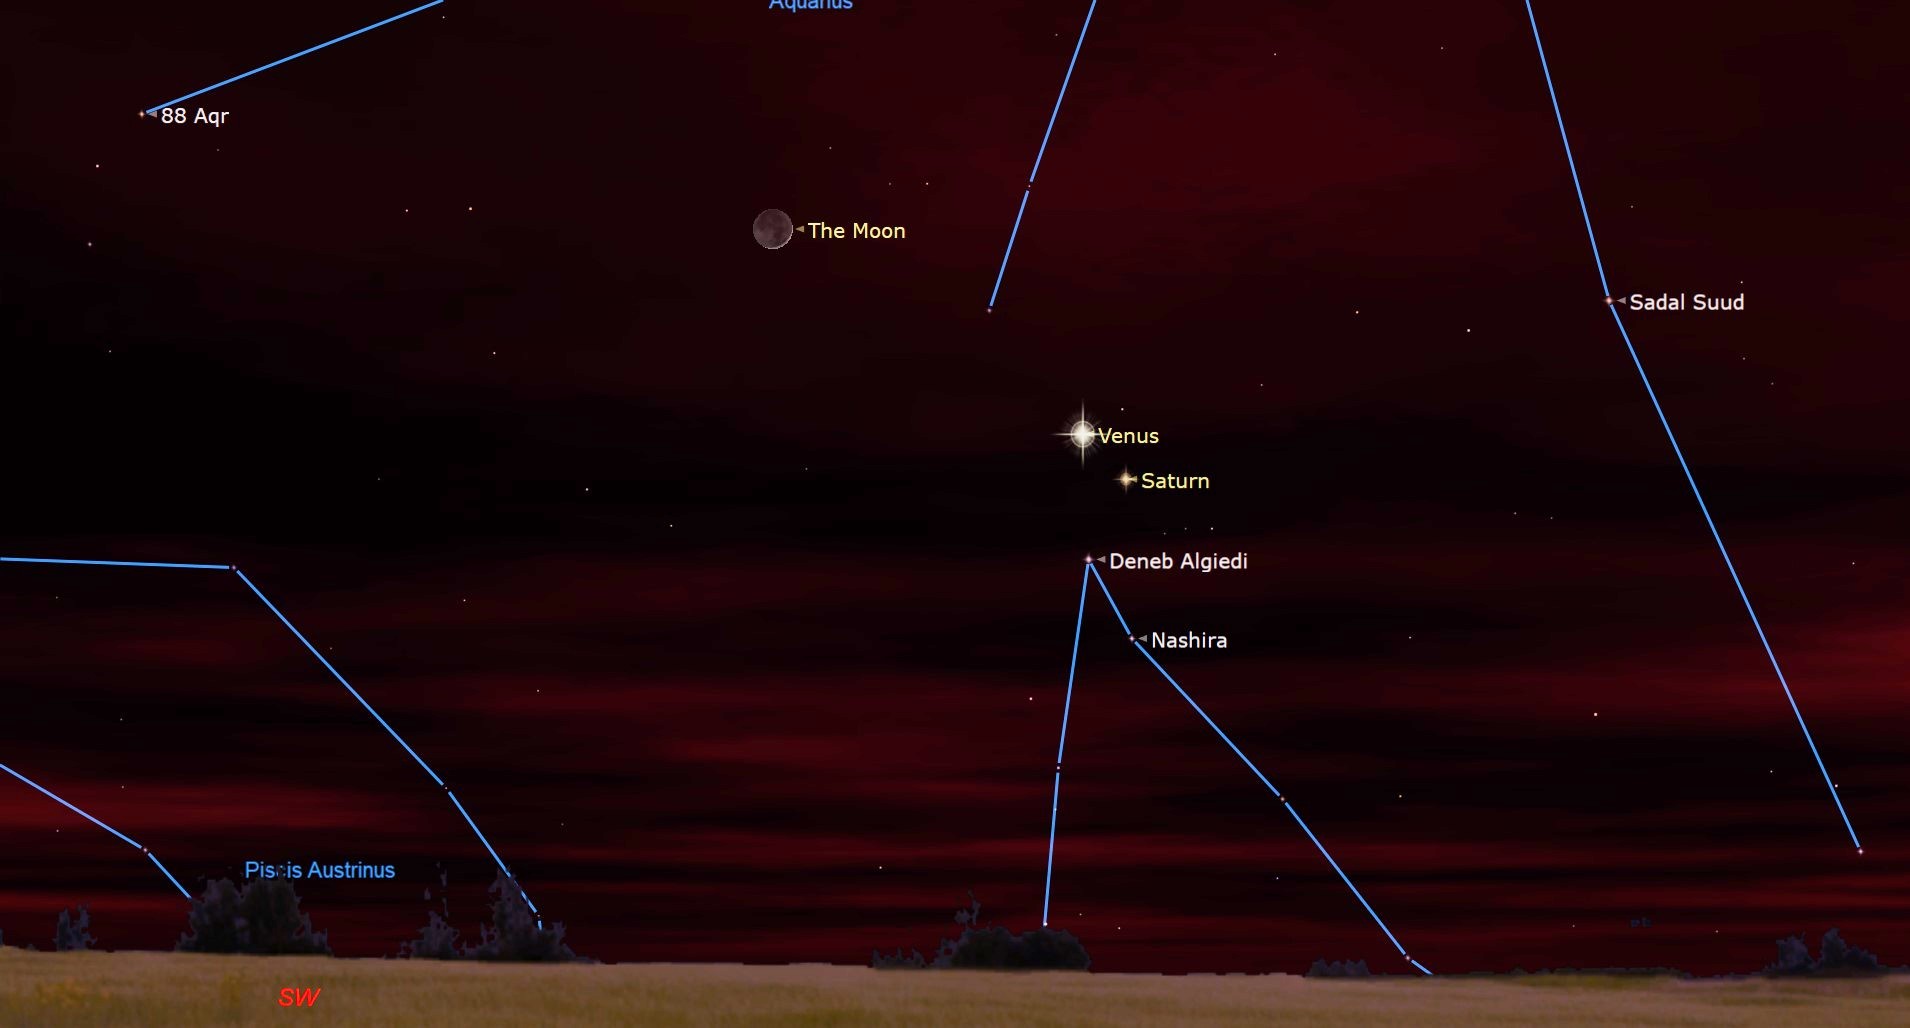 An illustration of the night sky on Jan. 23 showing the crescent moon alongside Venus and Saturn.